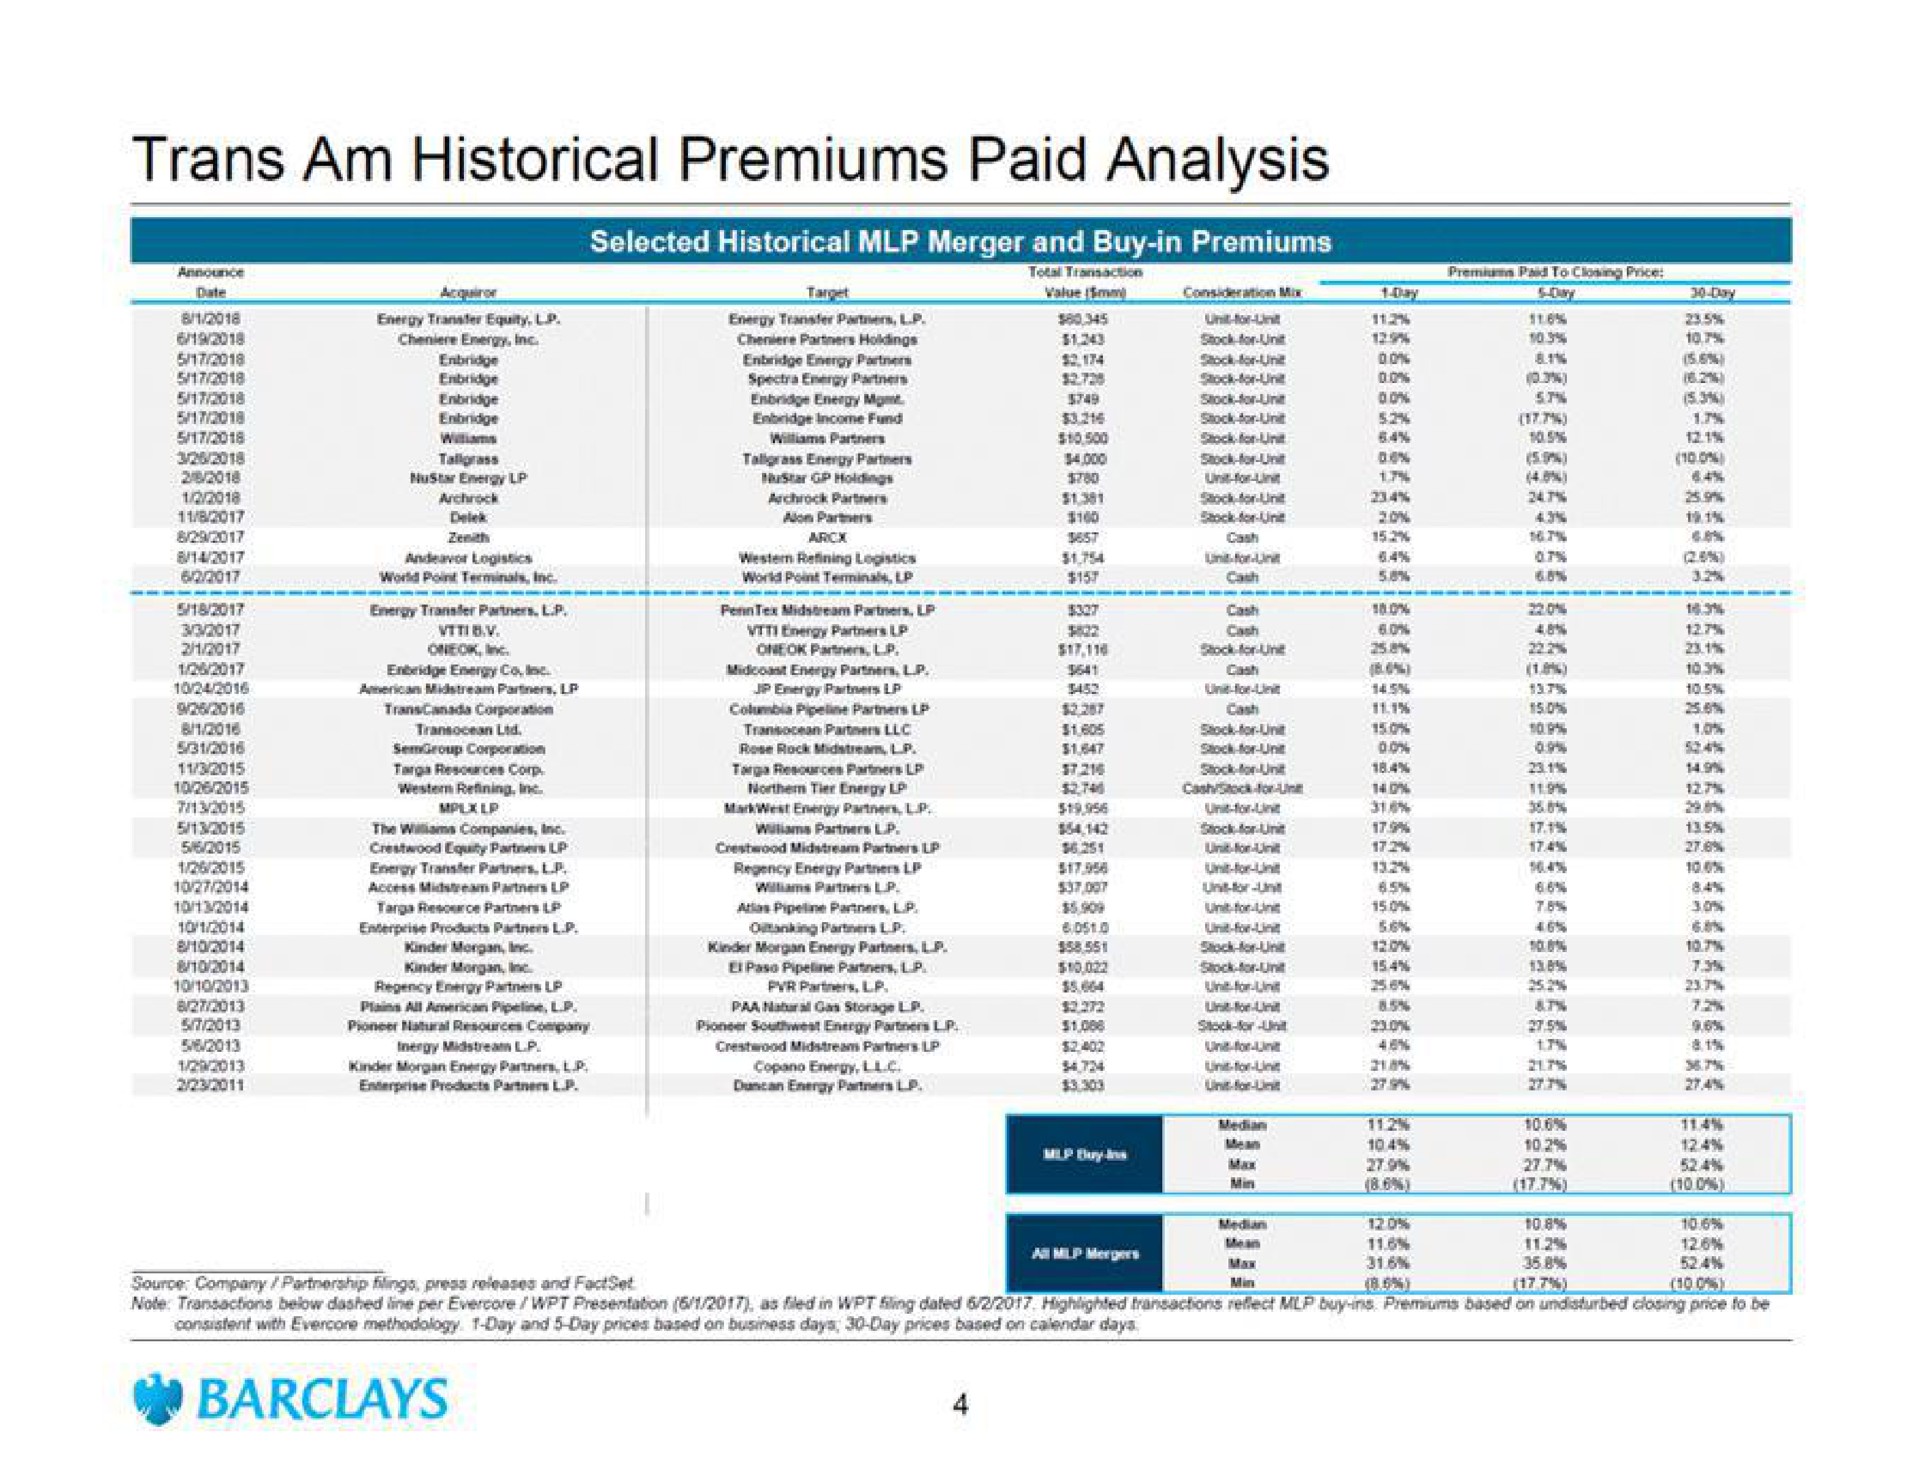 am historical premiums paid analysis selected historical merger and buy in premiums | Barclays